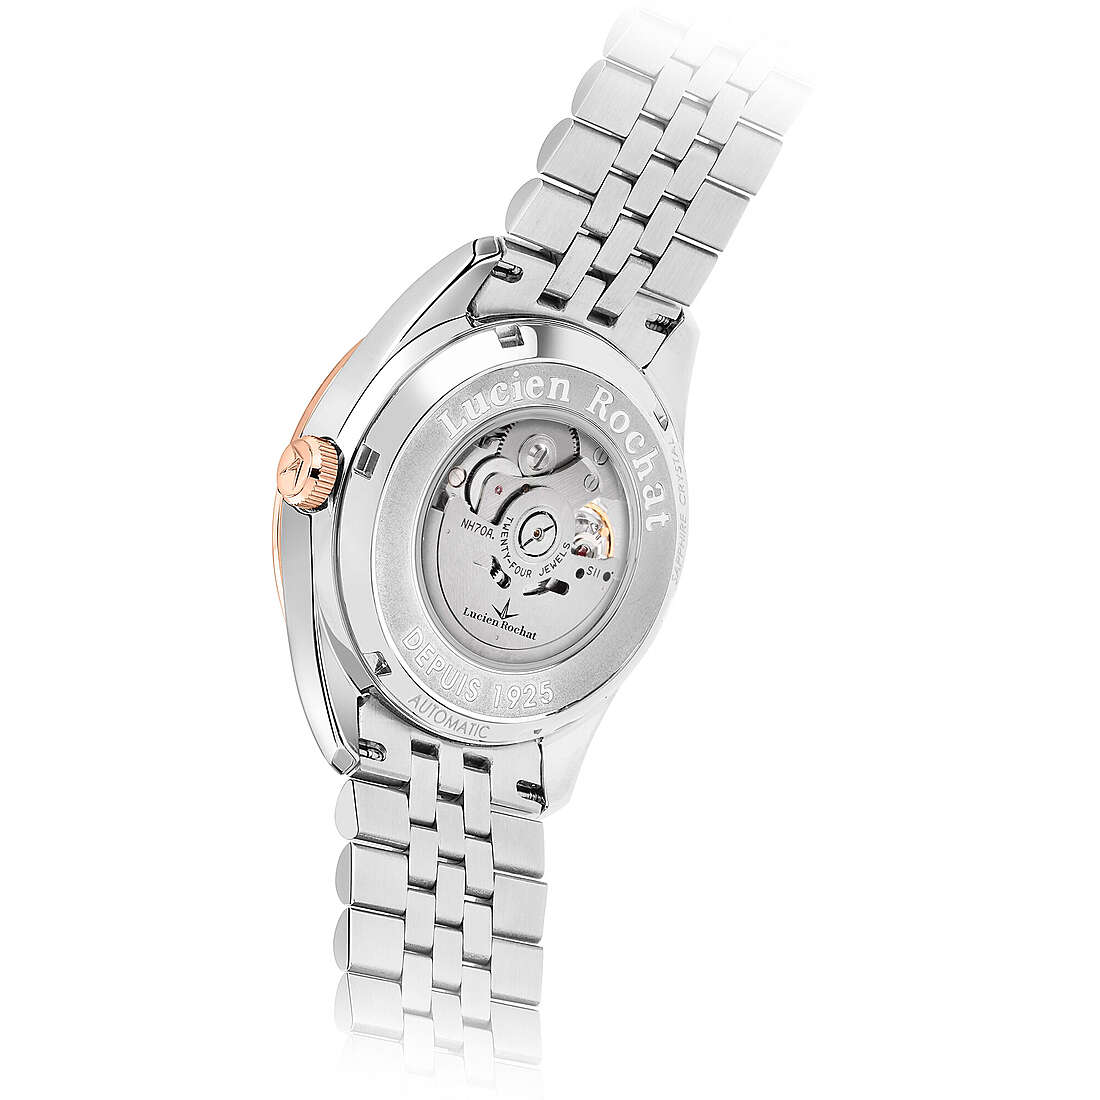 watch multifunction woman Lucien Rochat Madame R0423114501